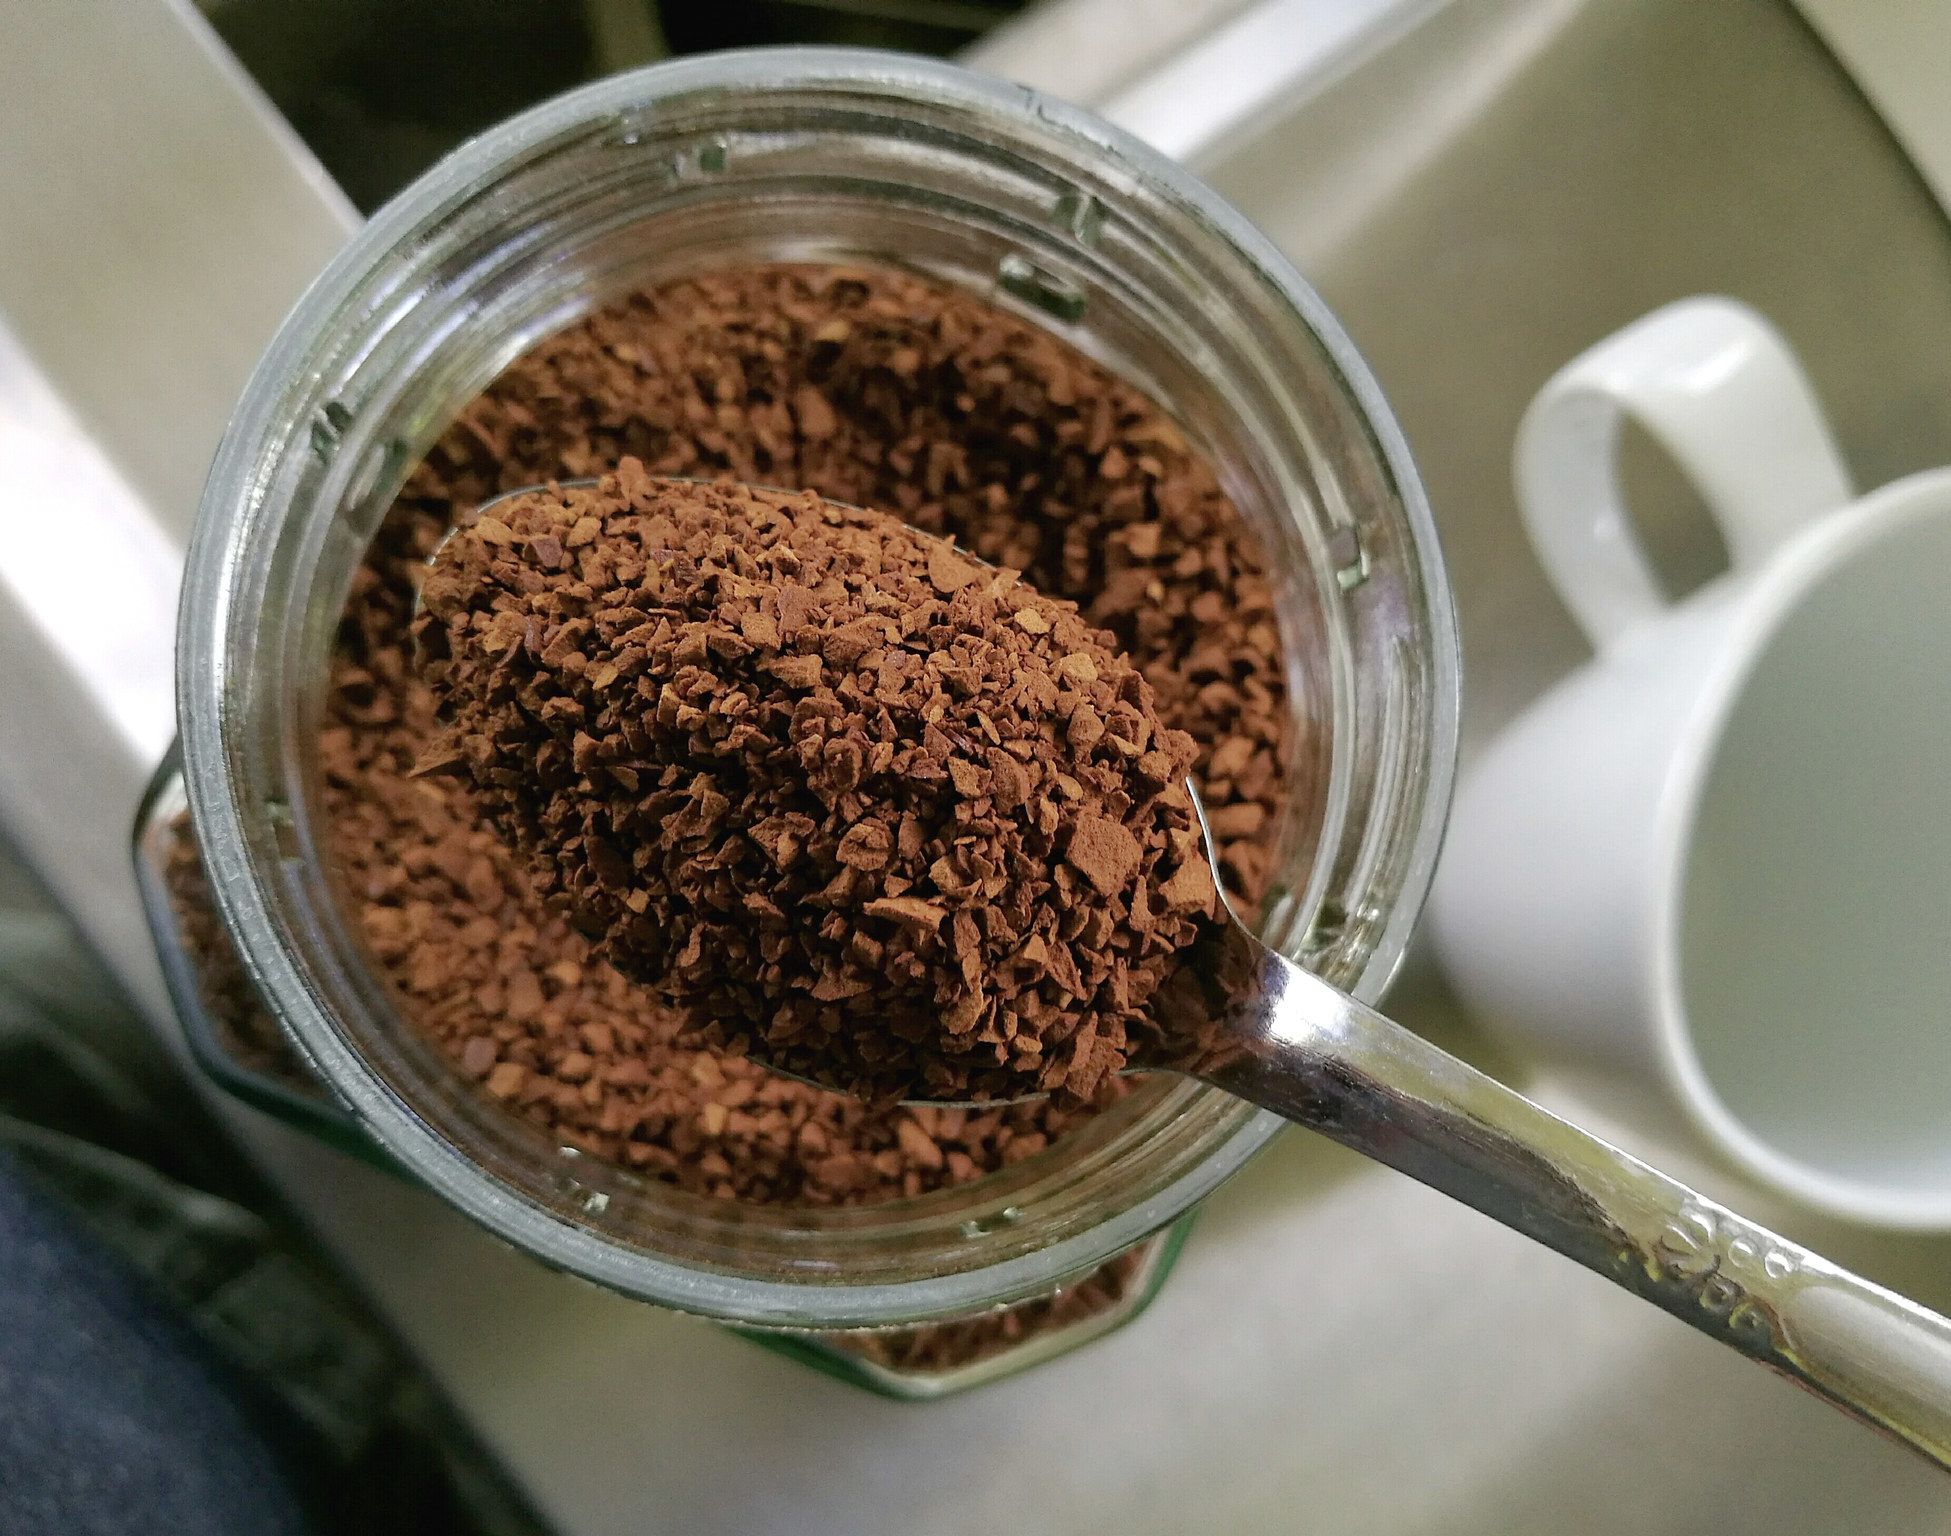 A spoonful of instant coffee